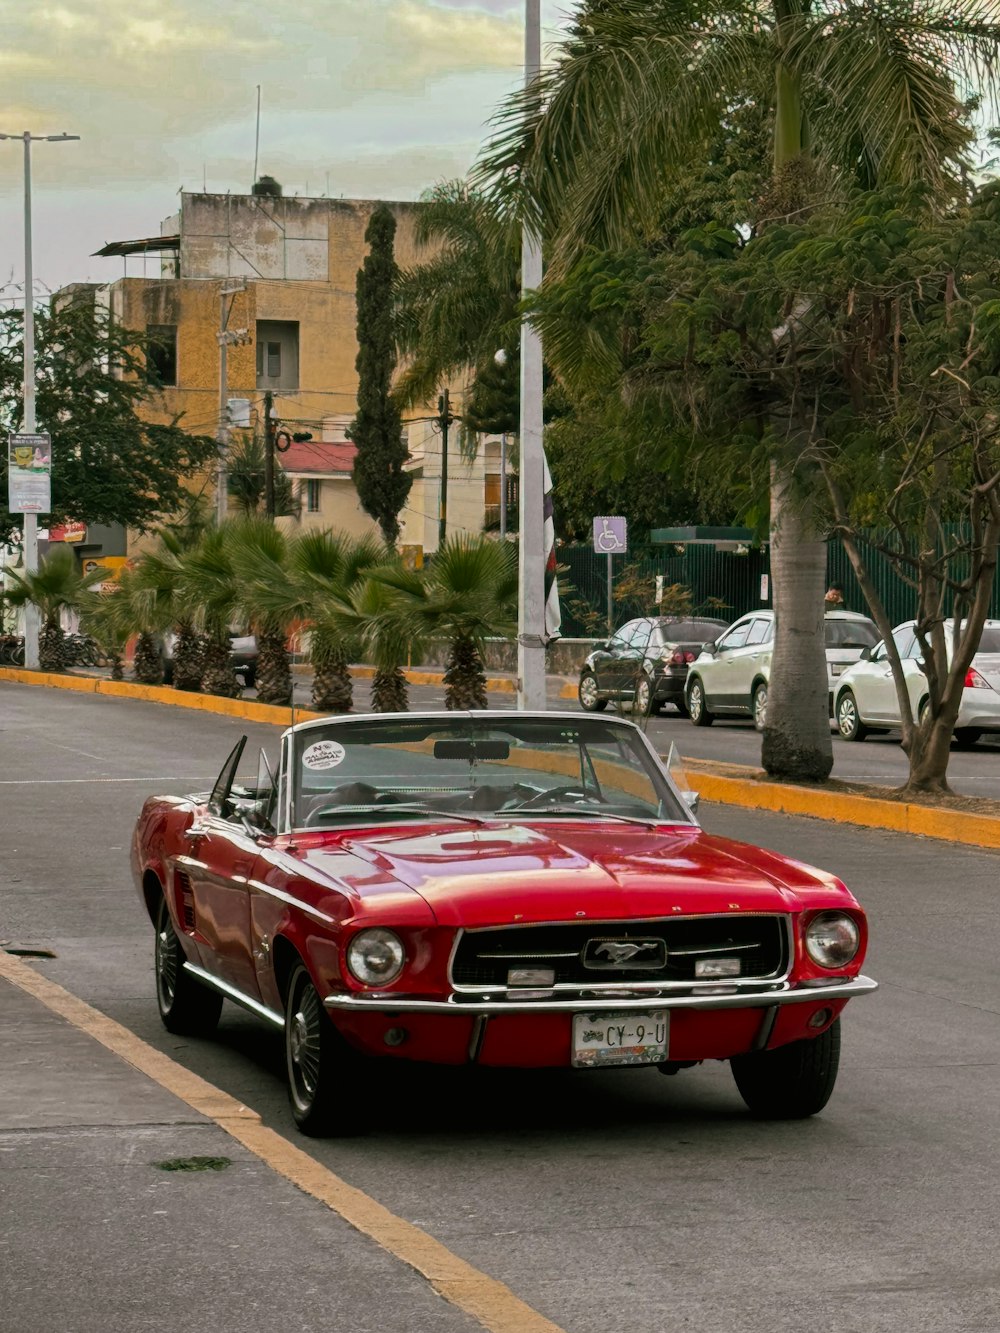 a red car driving down a street next to palm trees